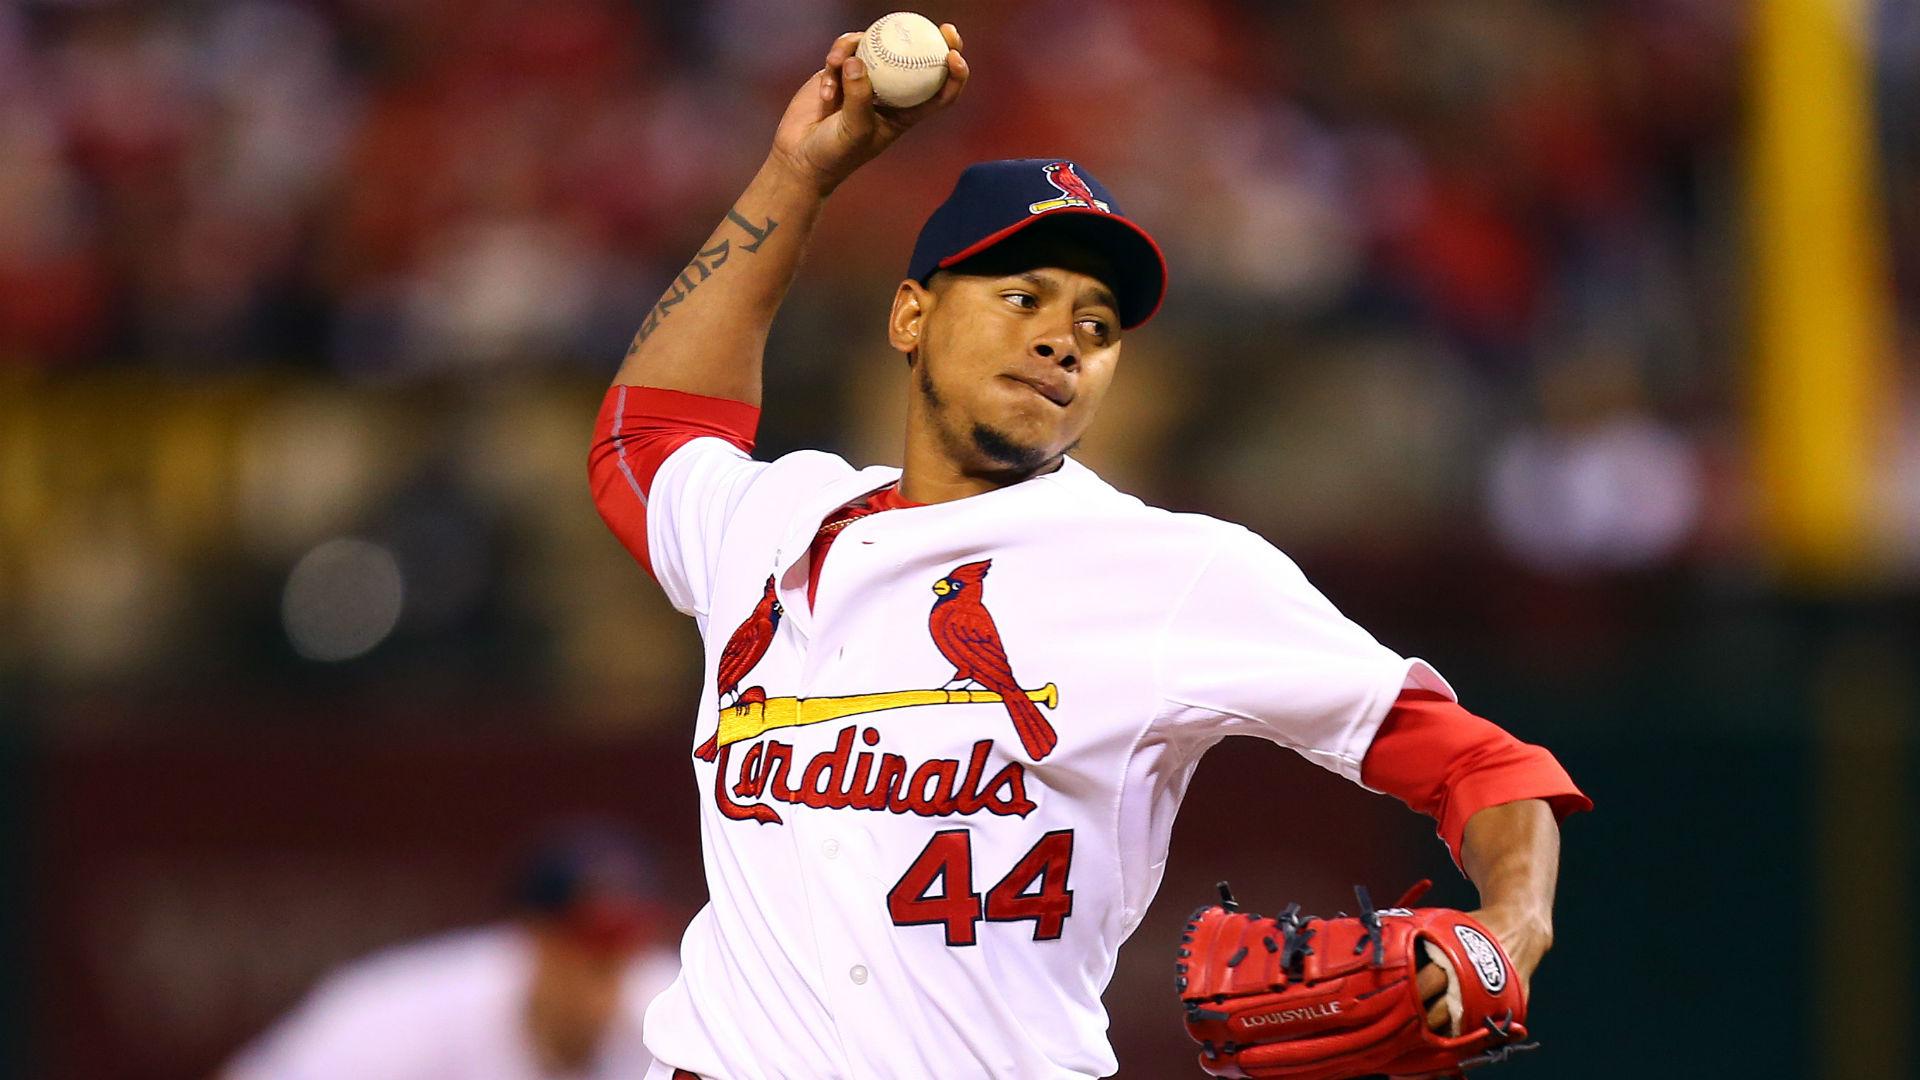 Inside Pitch: Carlos Martinez's fantasy stock rising. Other Sports